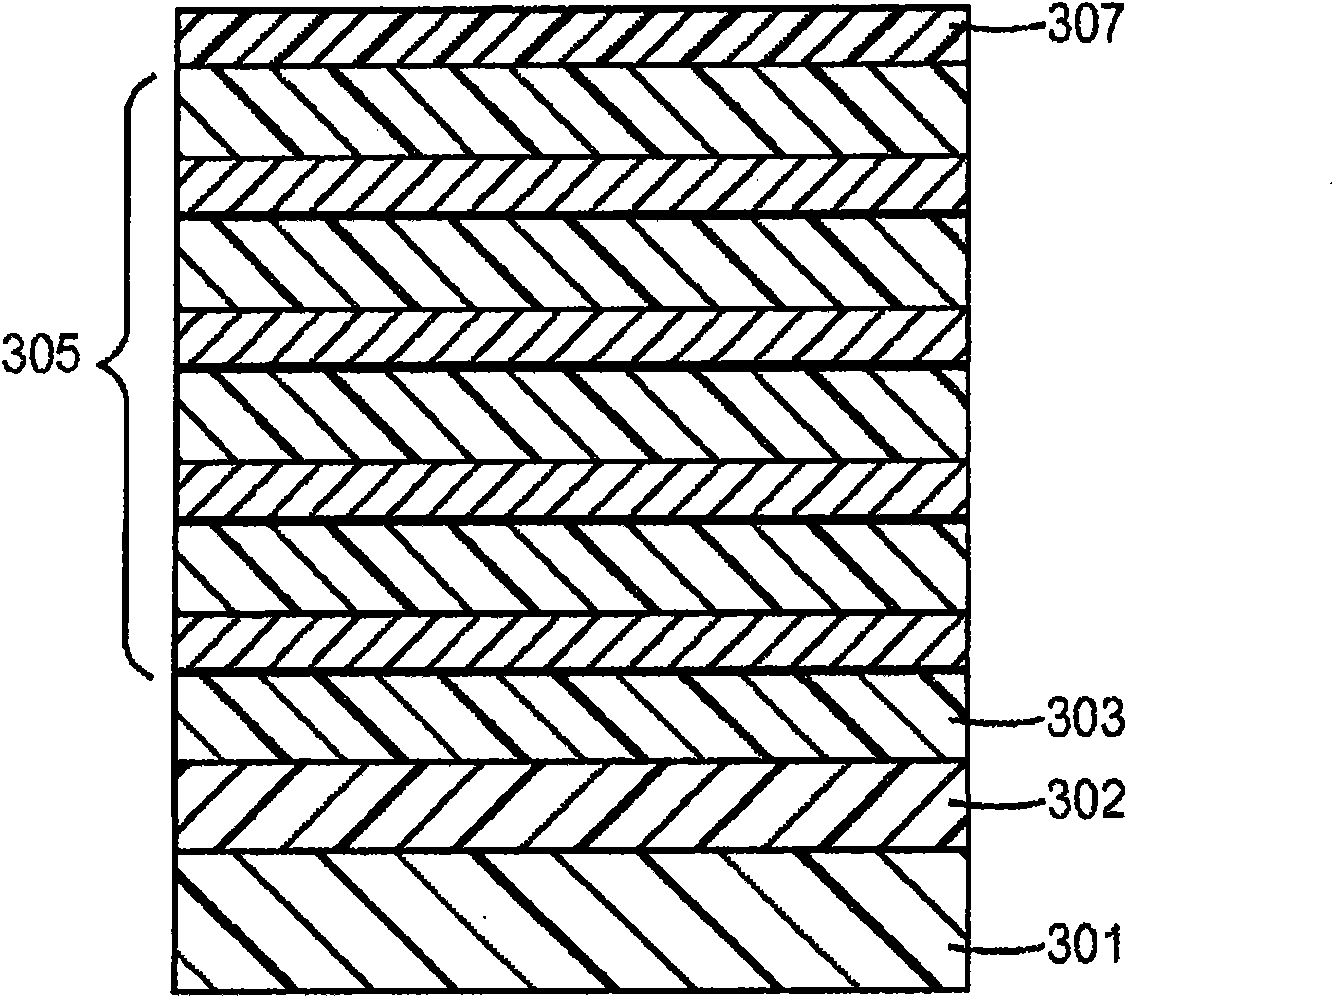 Multi-stack optical bandpass film with electro magnetic interference shielding for optical display filters